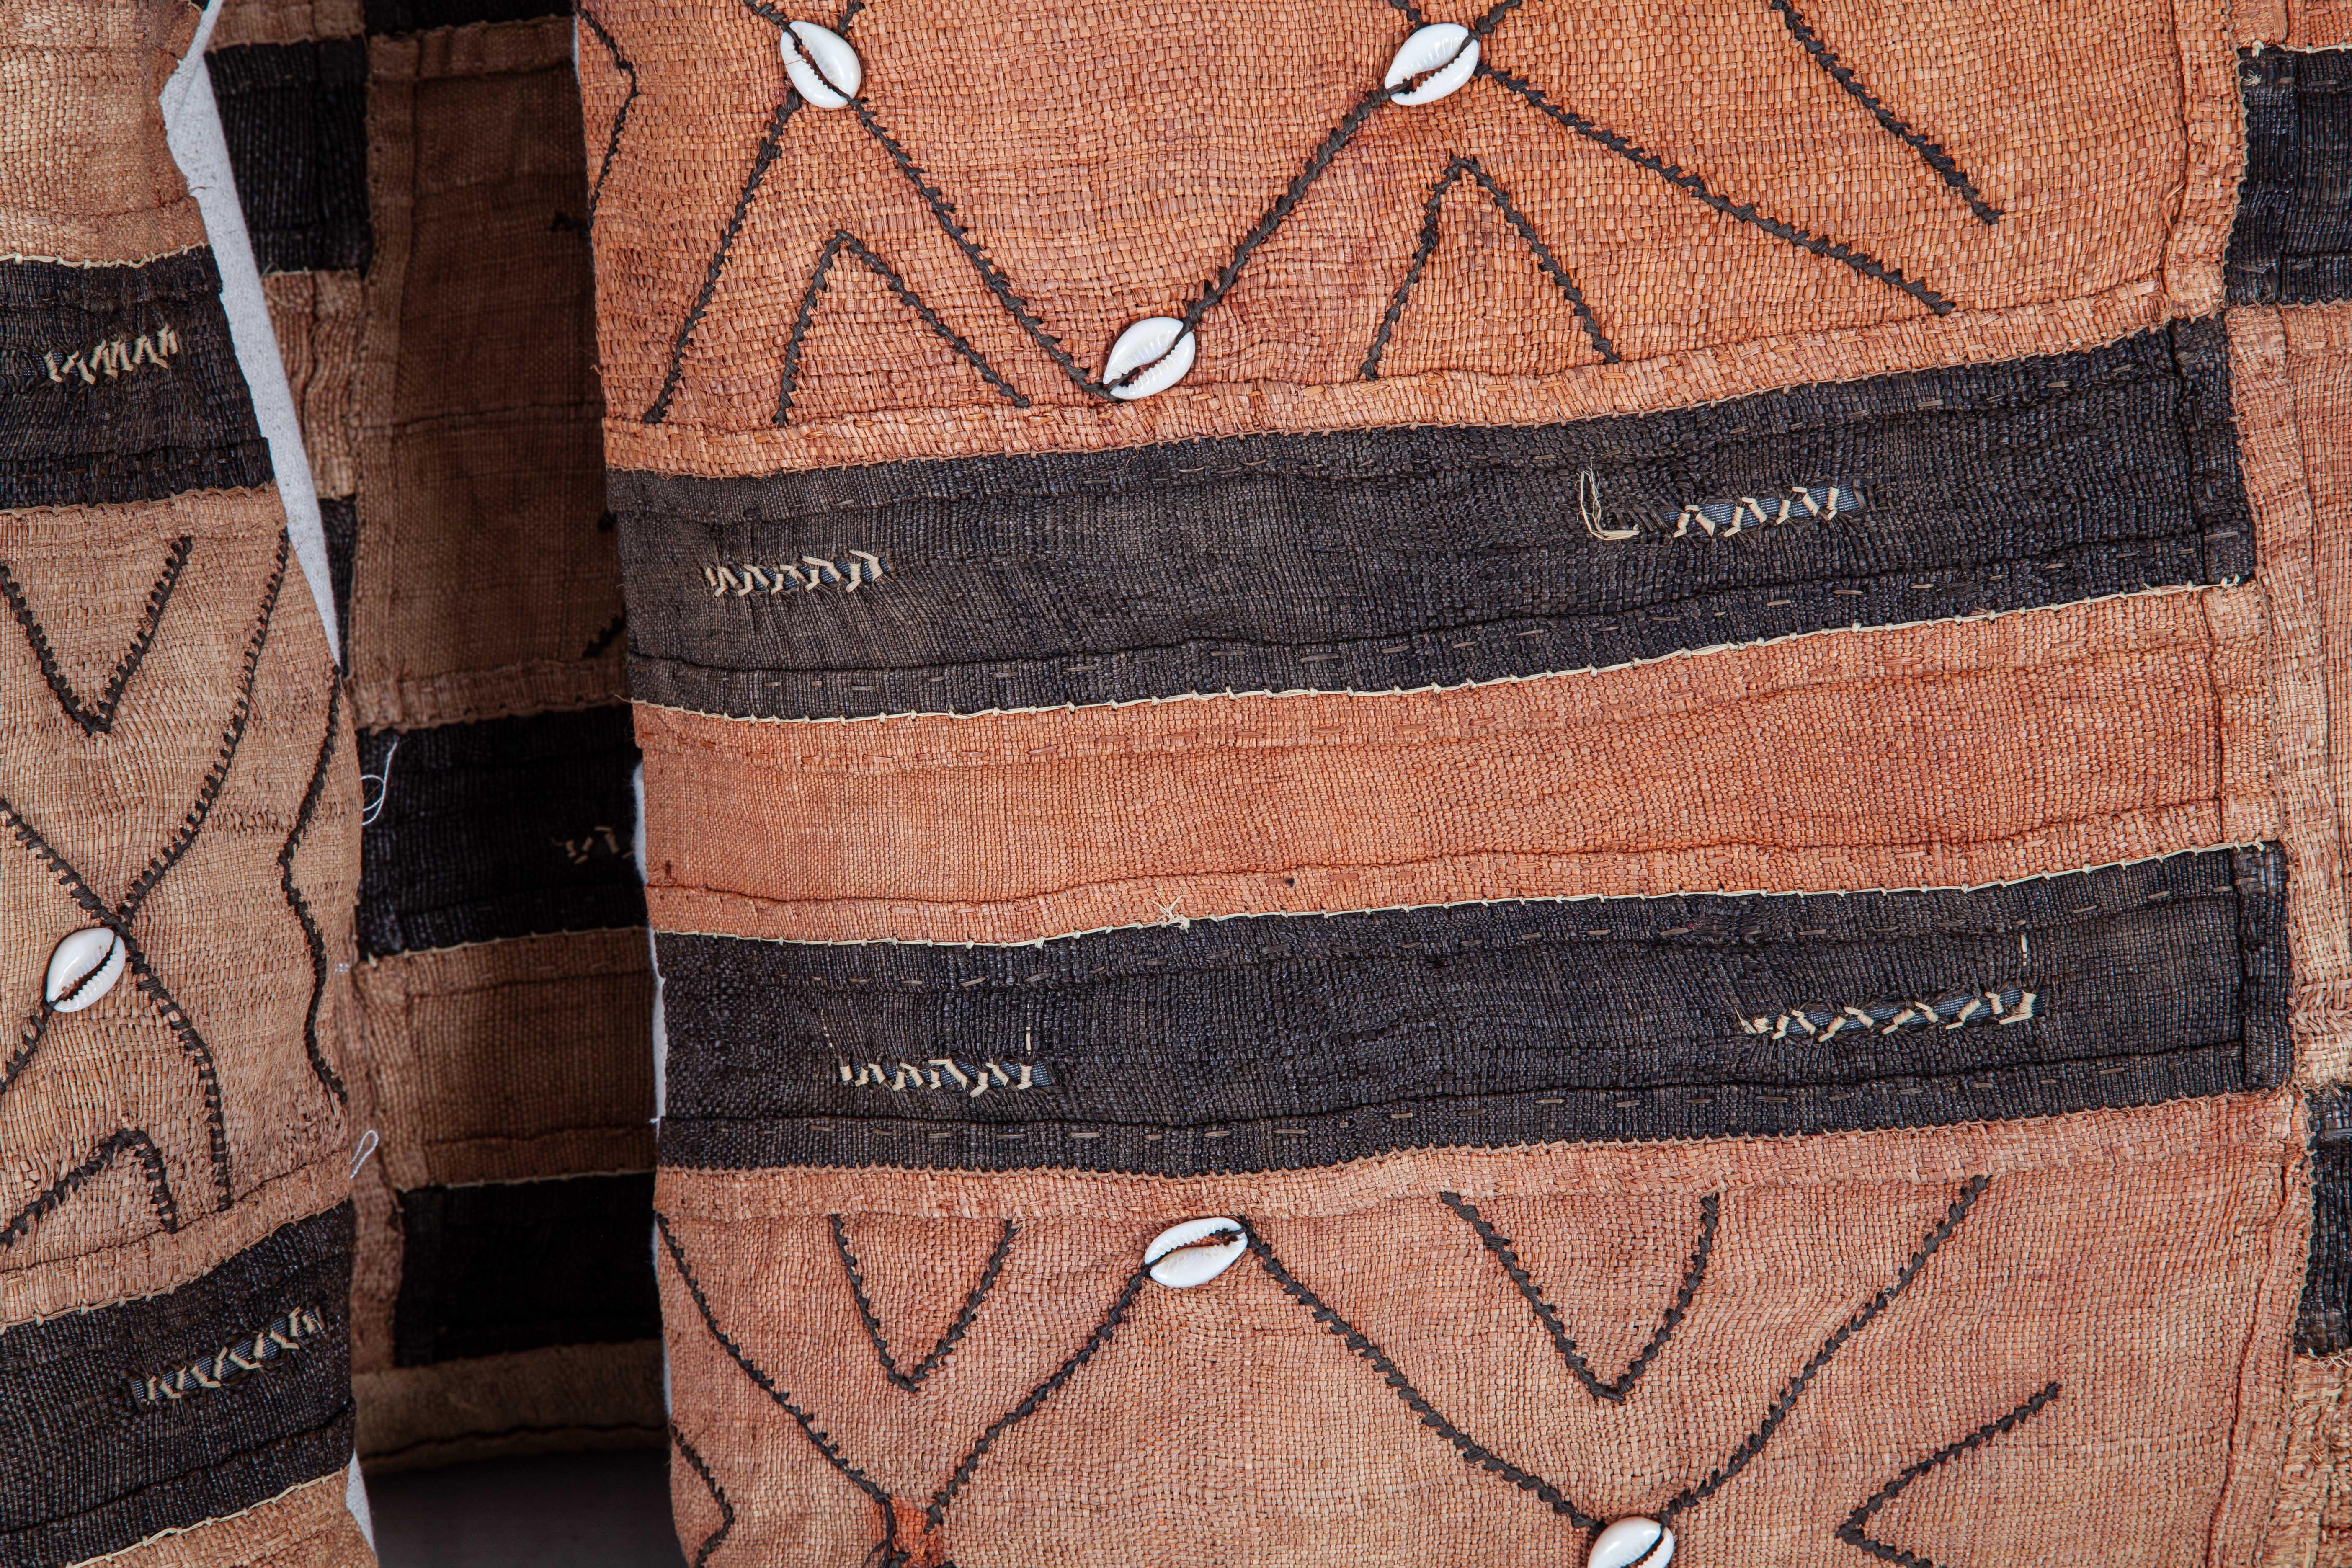 Hand-Woven Vintage African Kuba Cloth Pillow Cases, Mid-20th Century For Sale